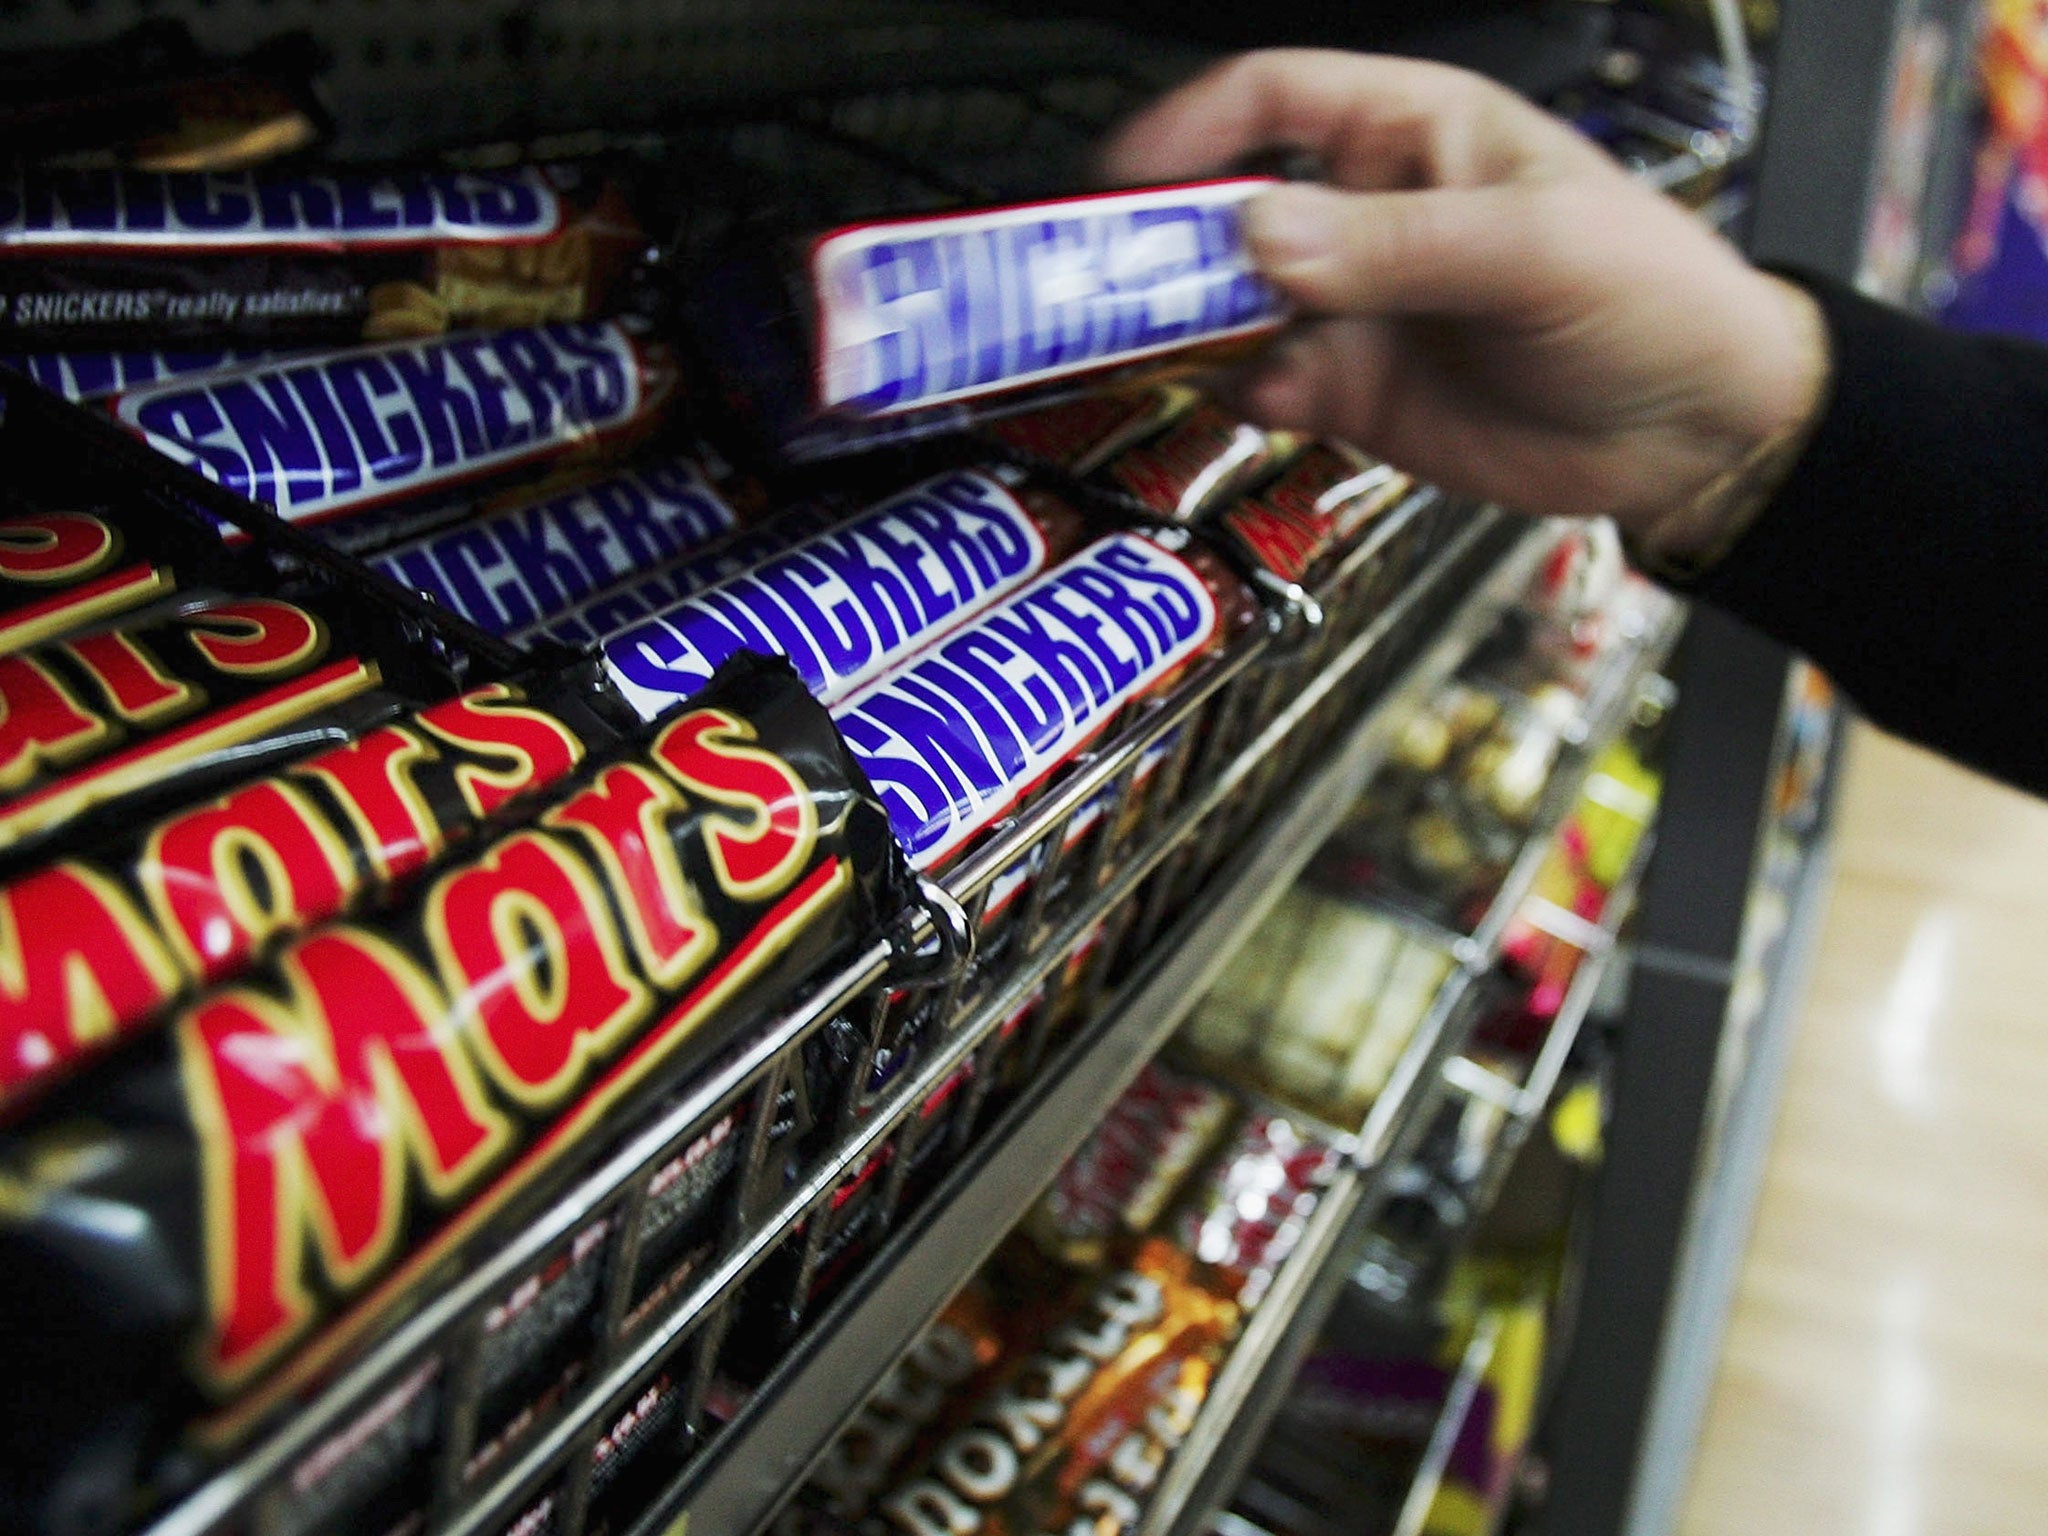 A customer picks up a Snickers Bar in a supermarket